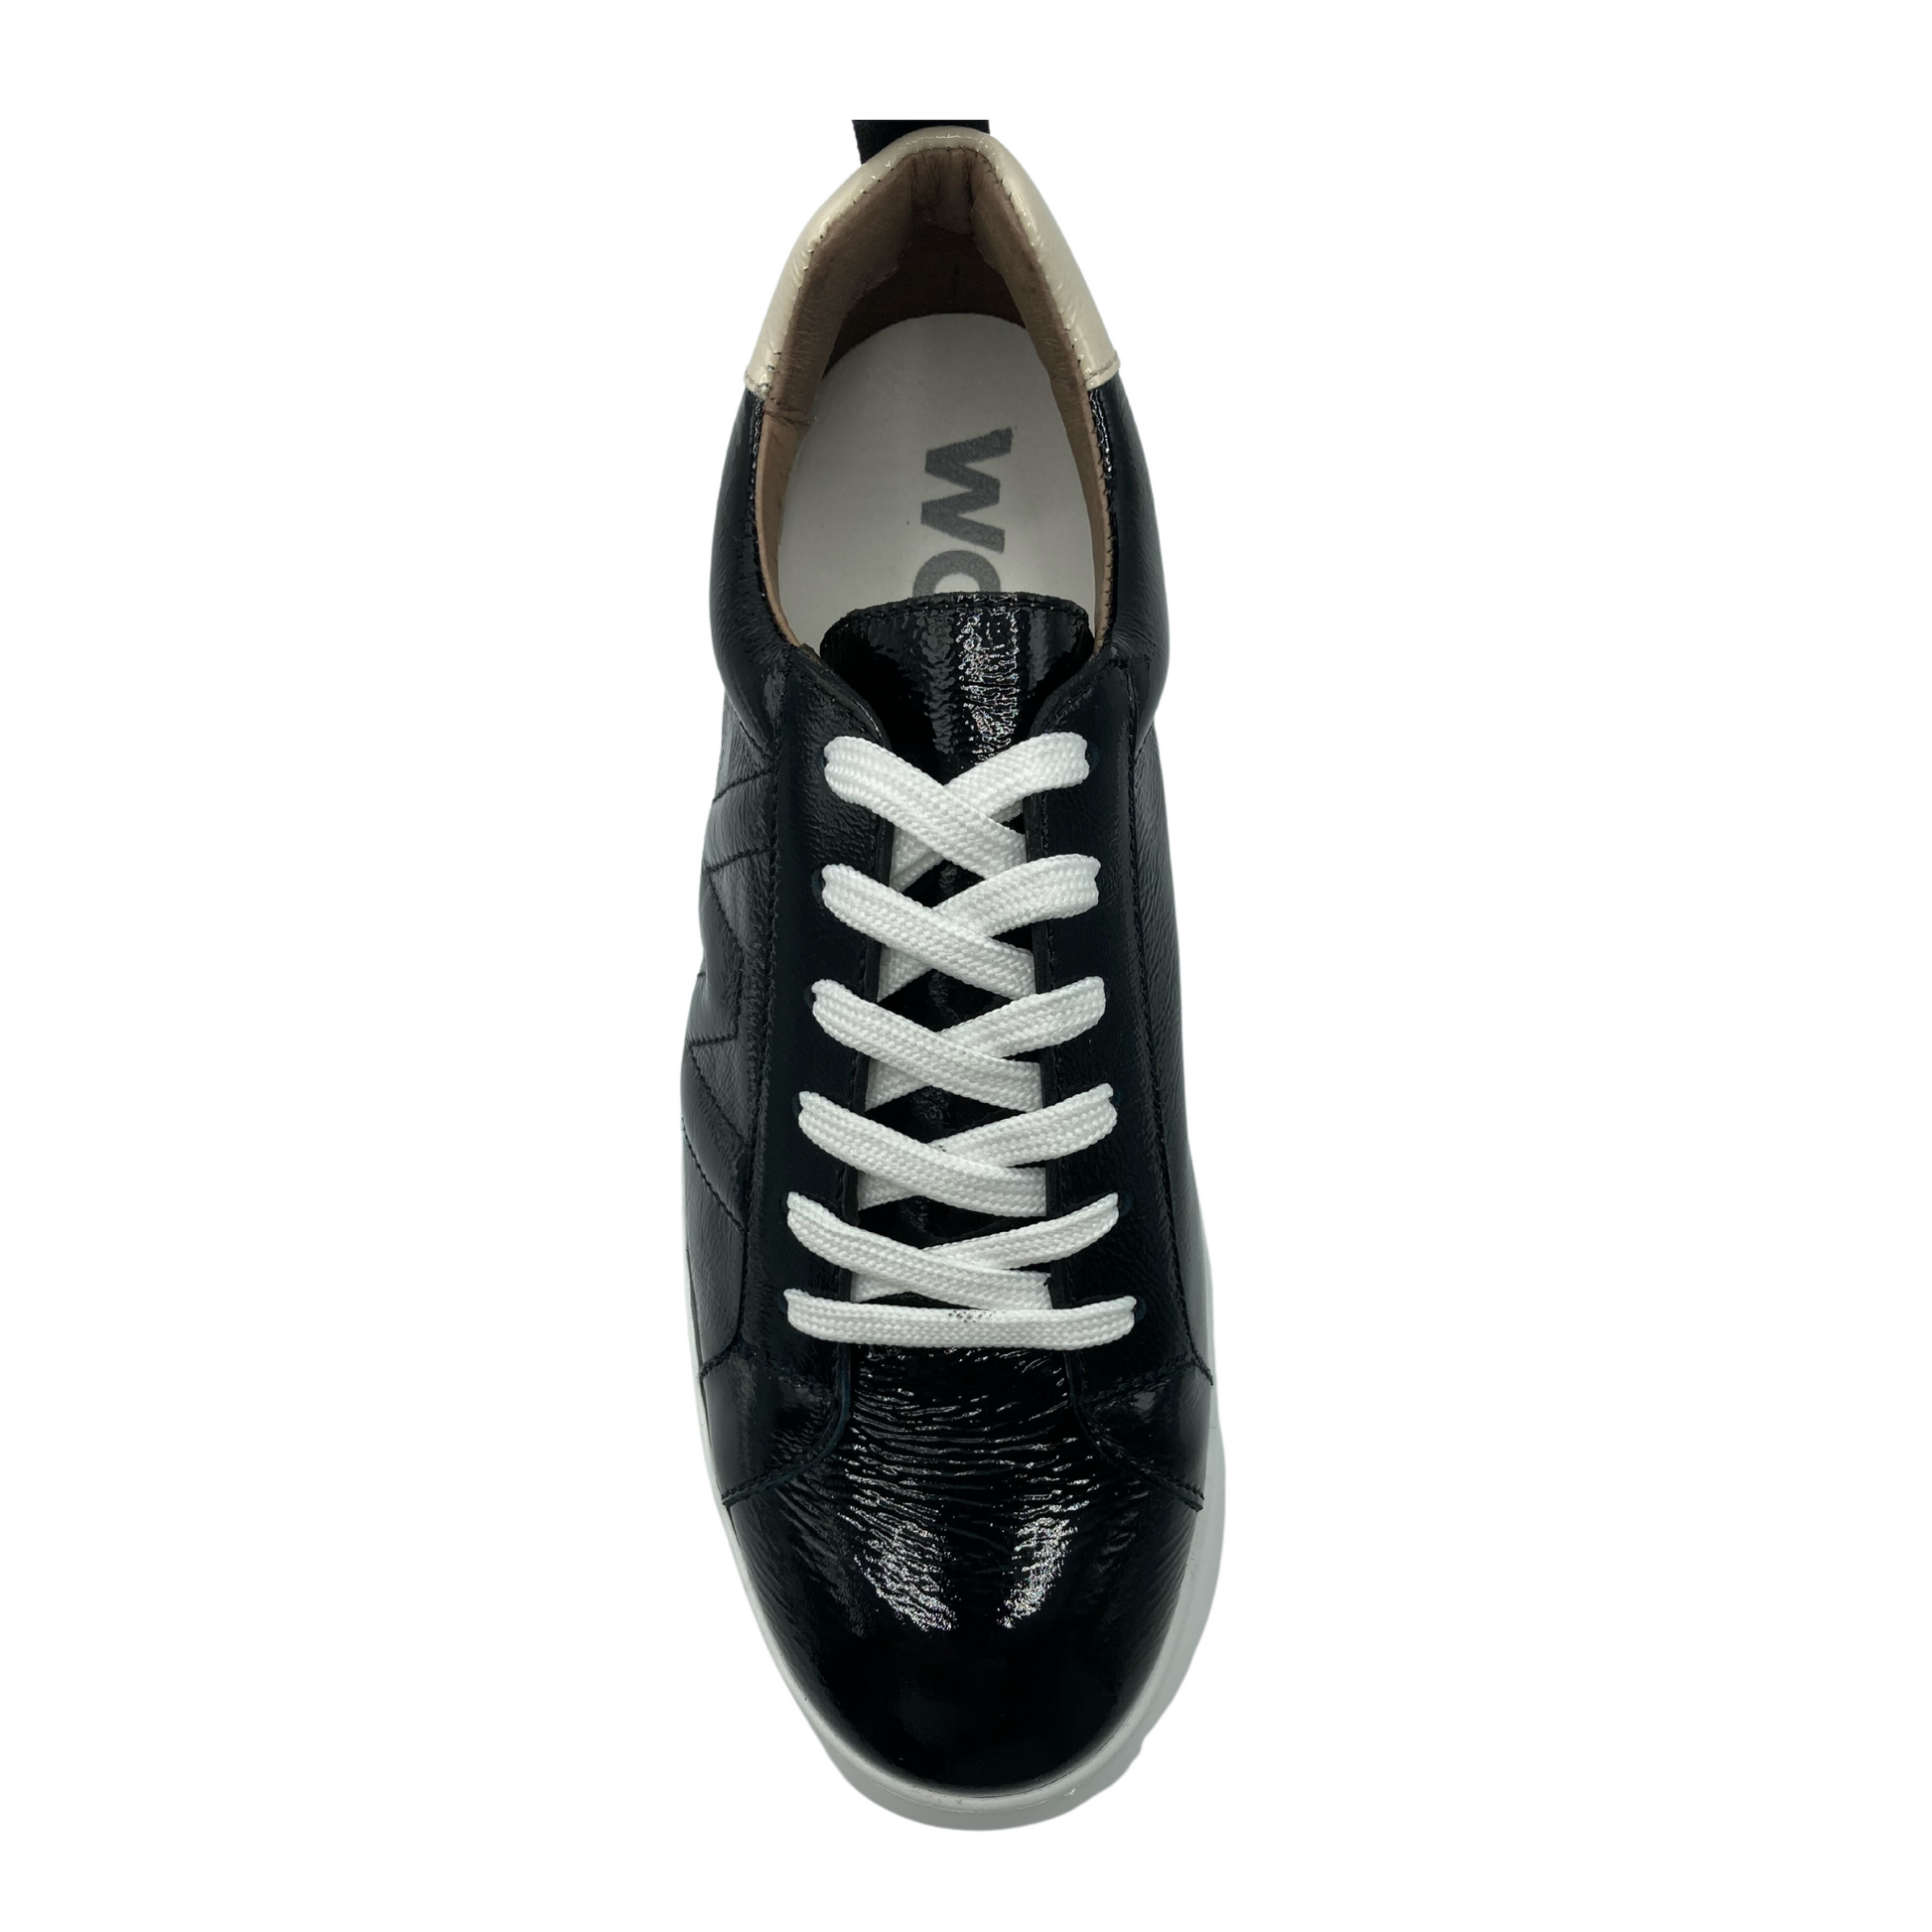 Top view of a black patent sneaker on a white platform sole. The sneaker has white lacing. 